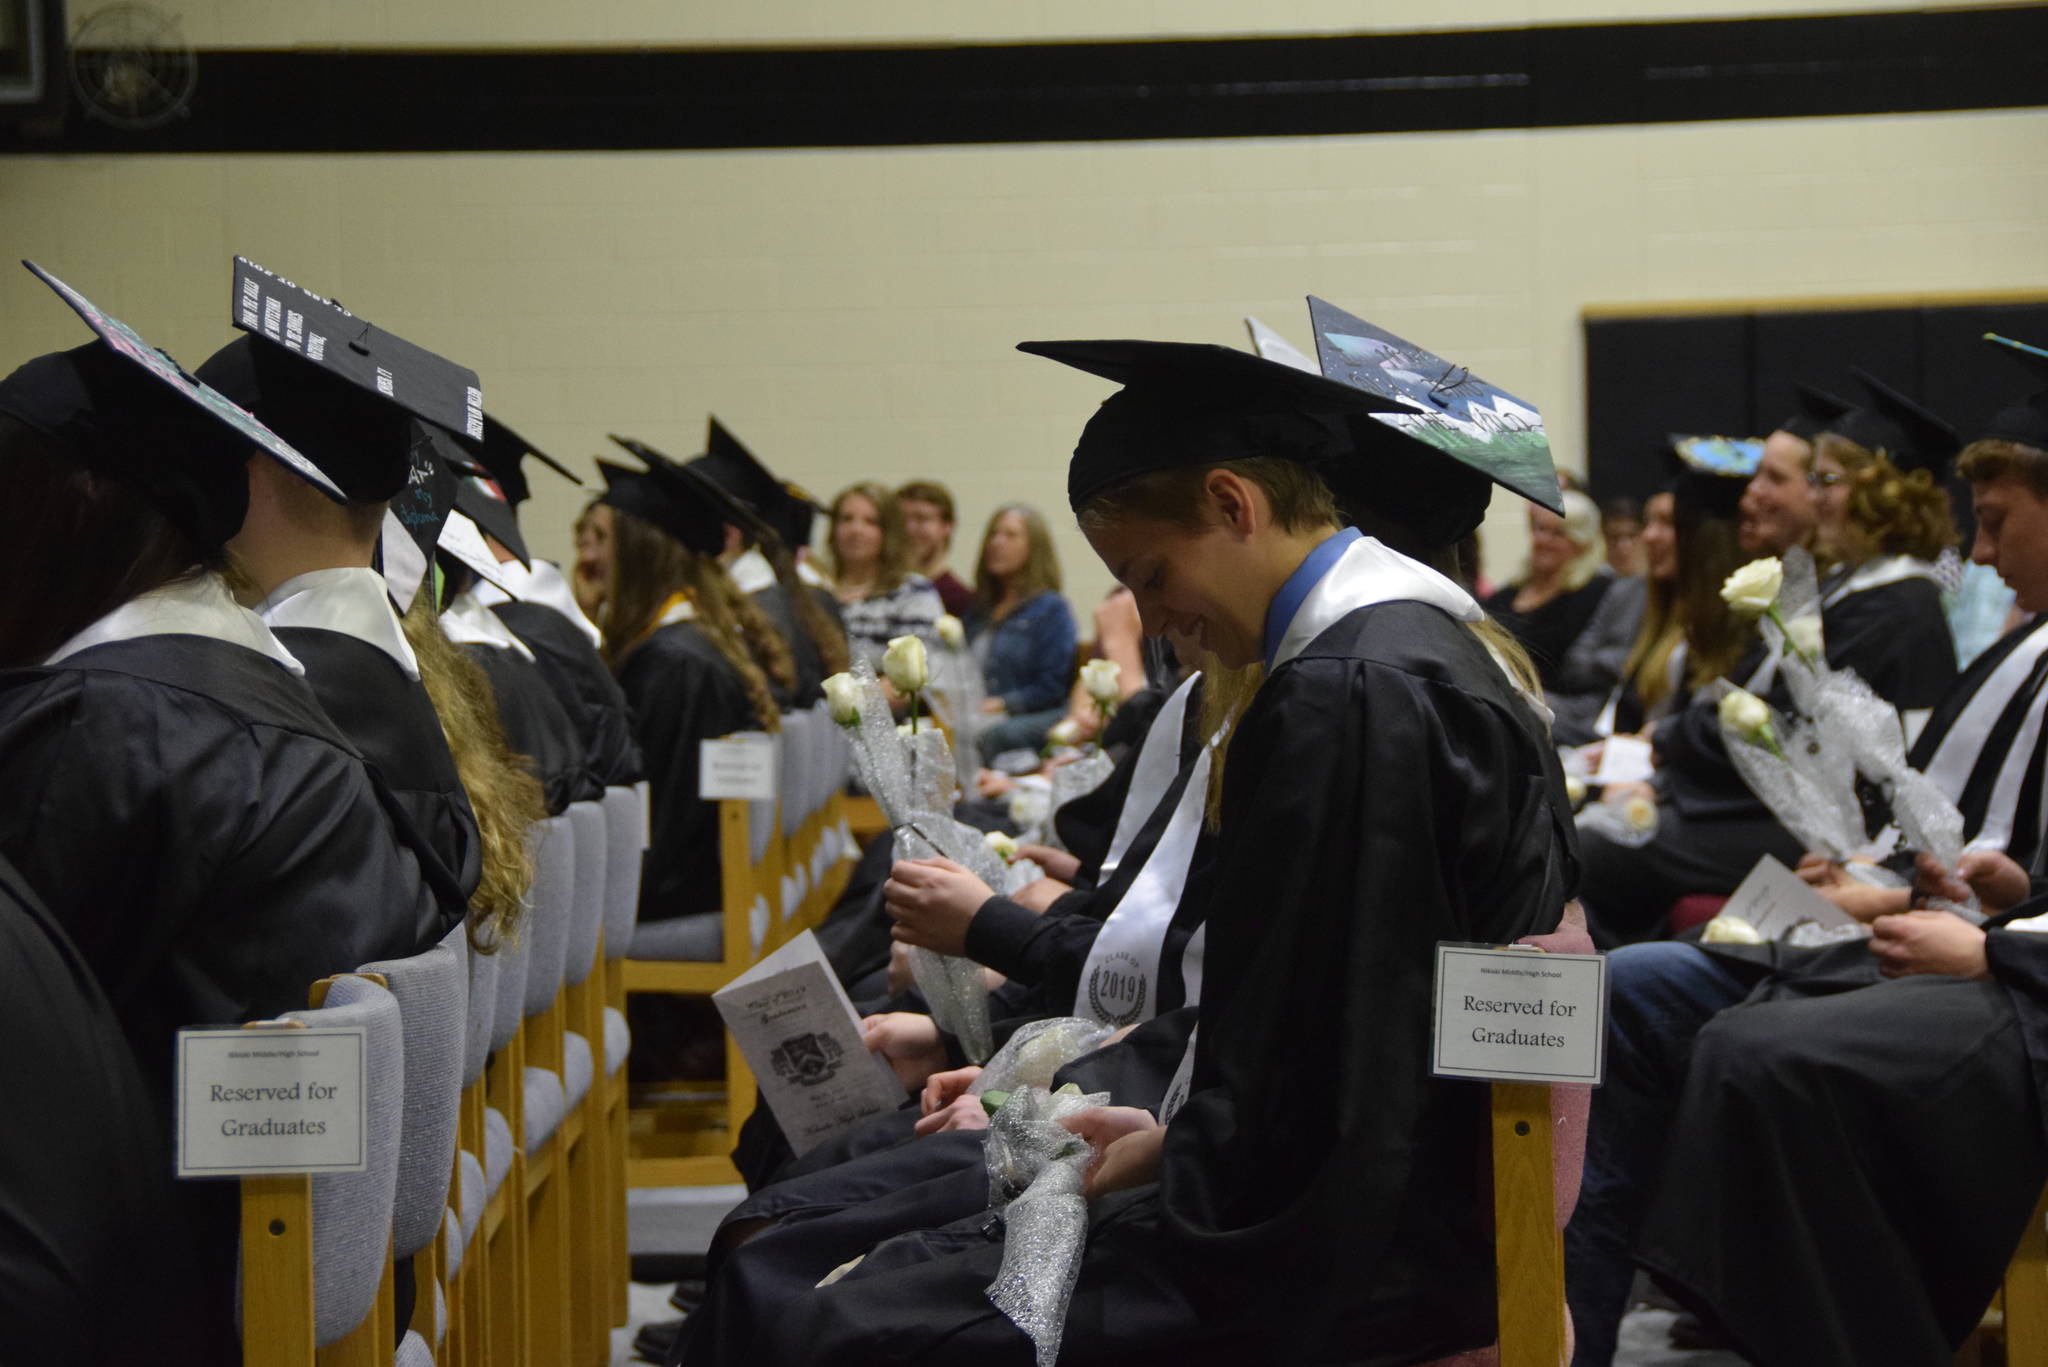 Abigail Bystedt and the other graduates sit in anticipation during the 2019 Nikiski High School graduation in Nikiski, Alaska on May 20, 2019. (Photo by Brian Mazurek/Peninsula Clarion)